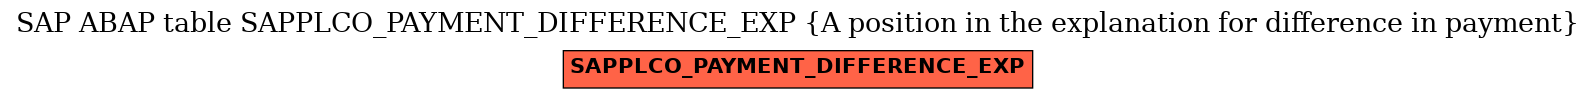 E-R Diagram for table SAPPLCO_PAYMENT_DIFFERENCE_EXP (A position in the explanation for difference in payment)